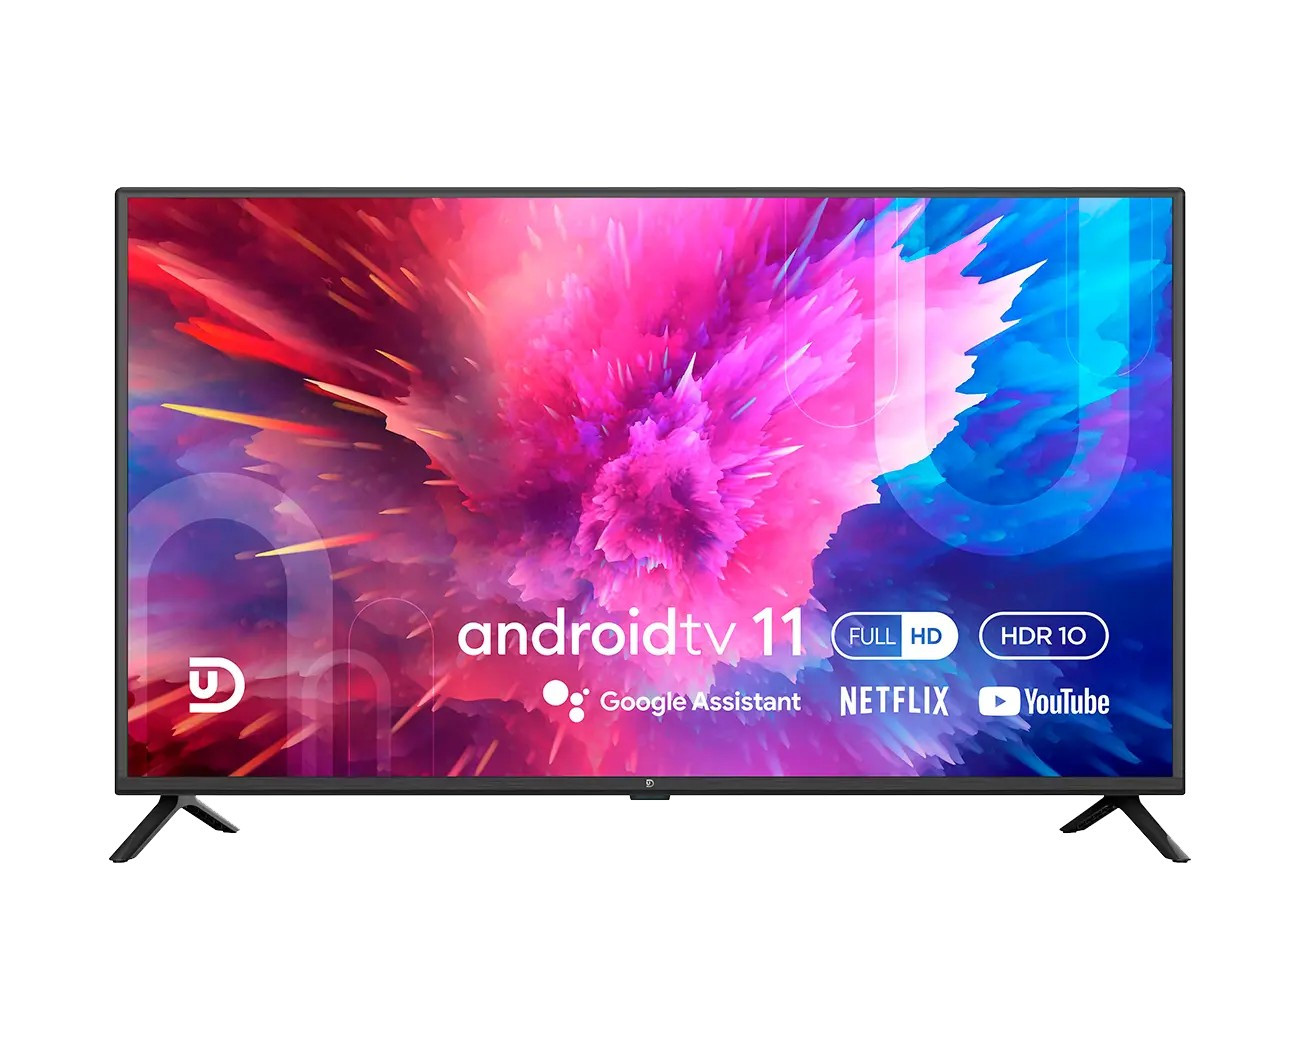 UD 40F5210S FHD D-LED Android 11